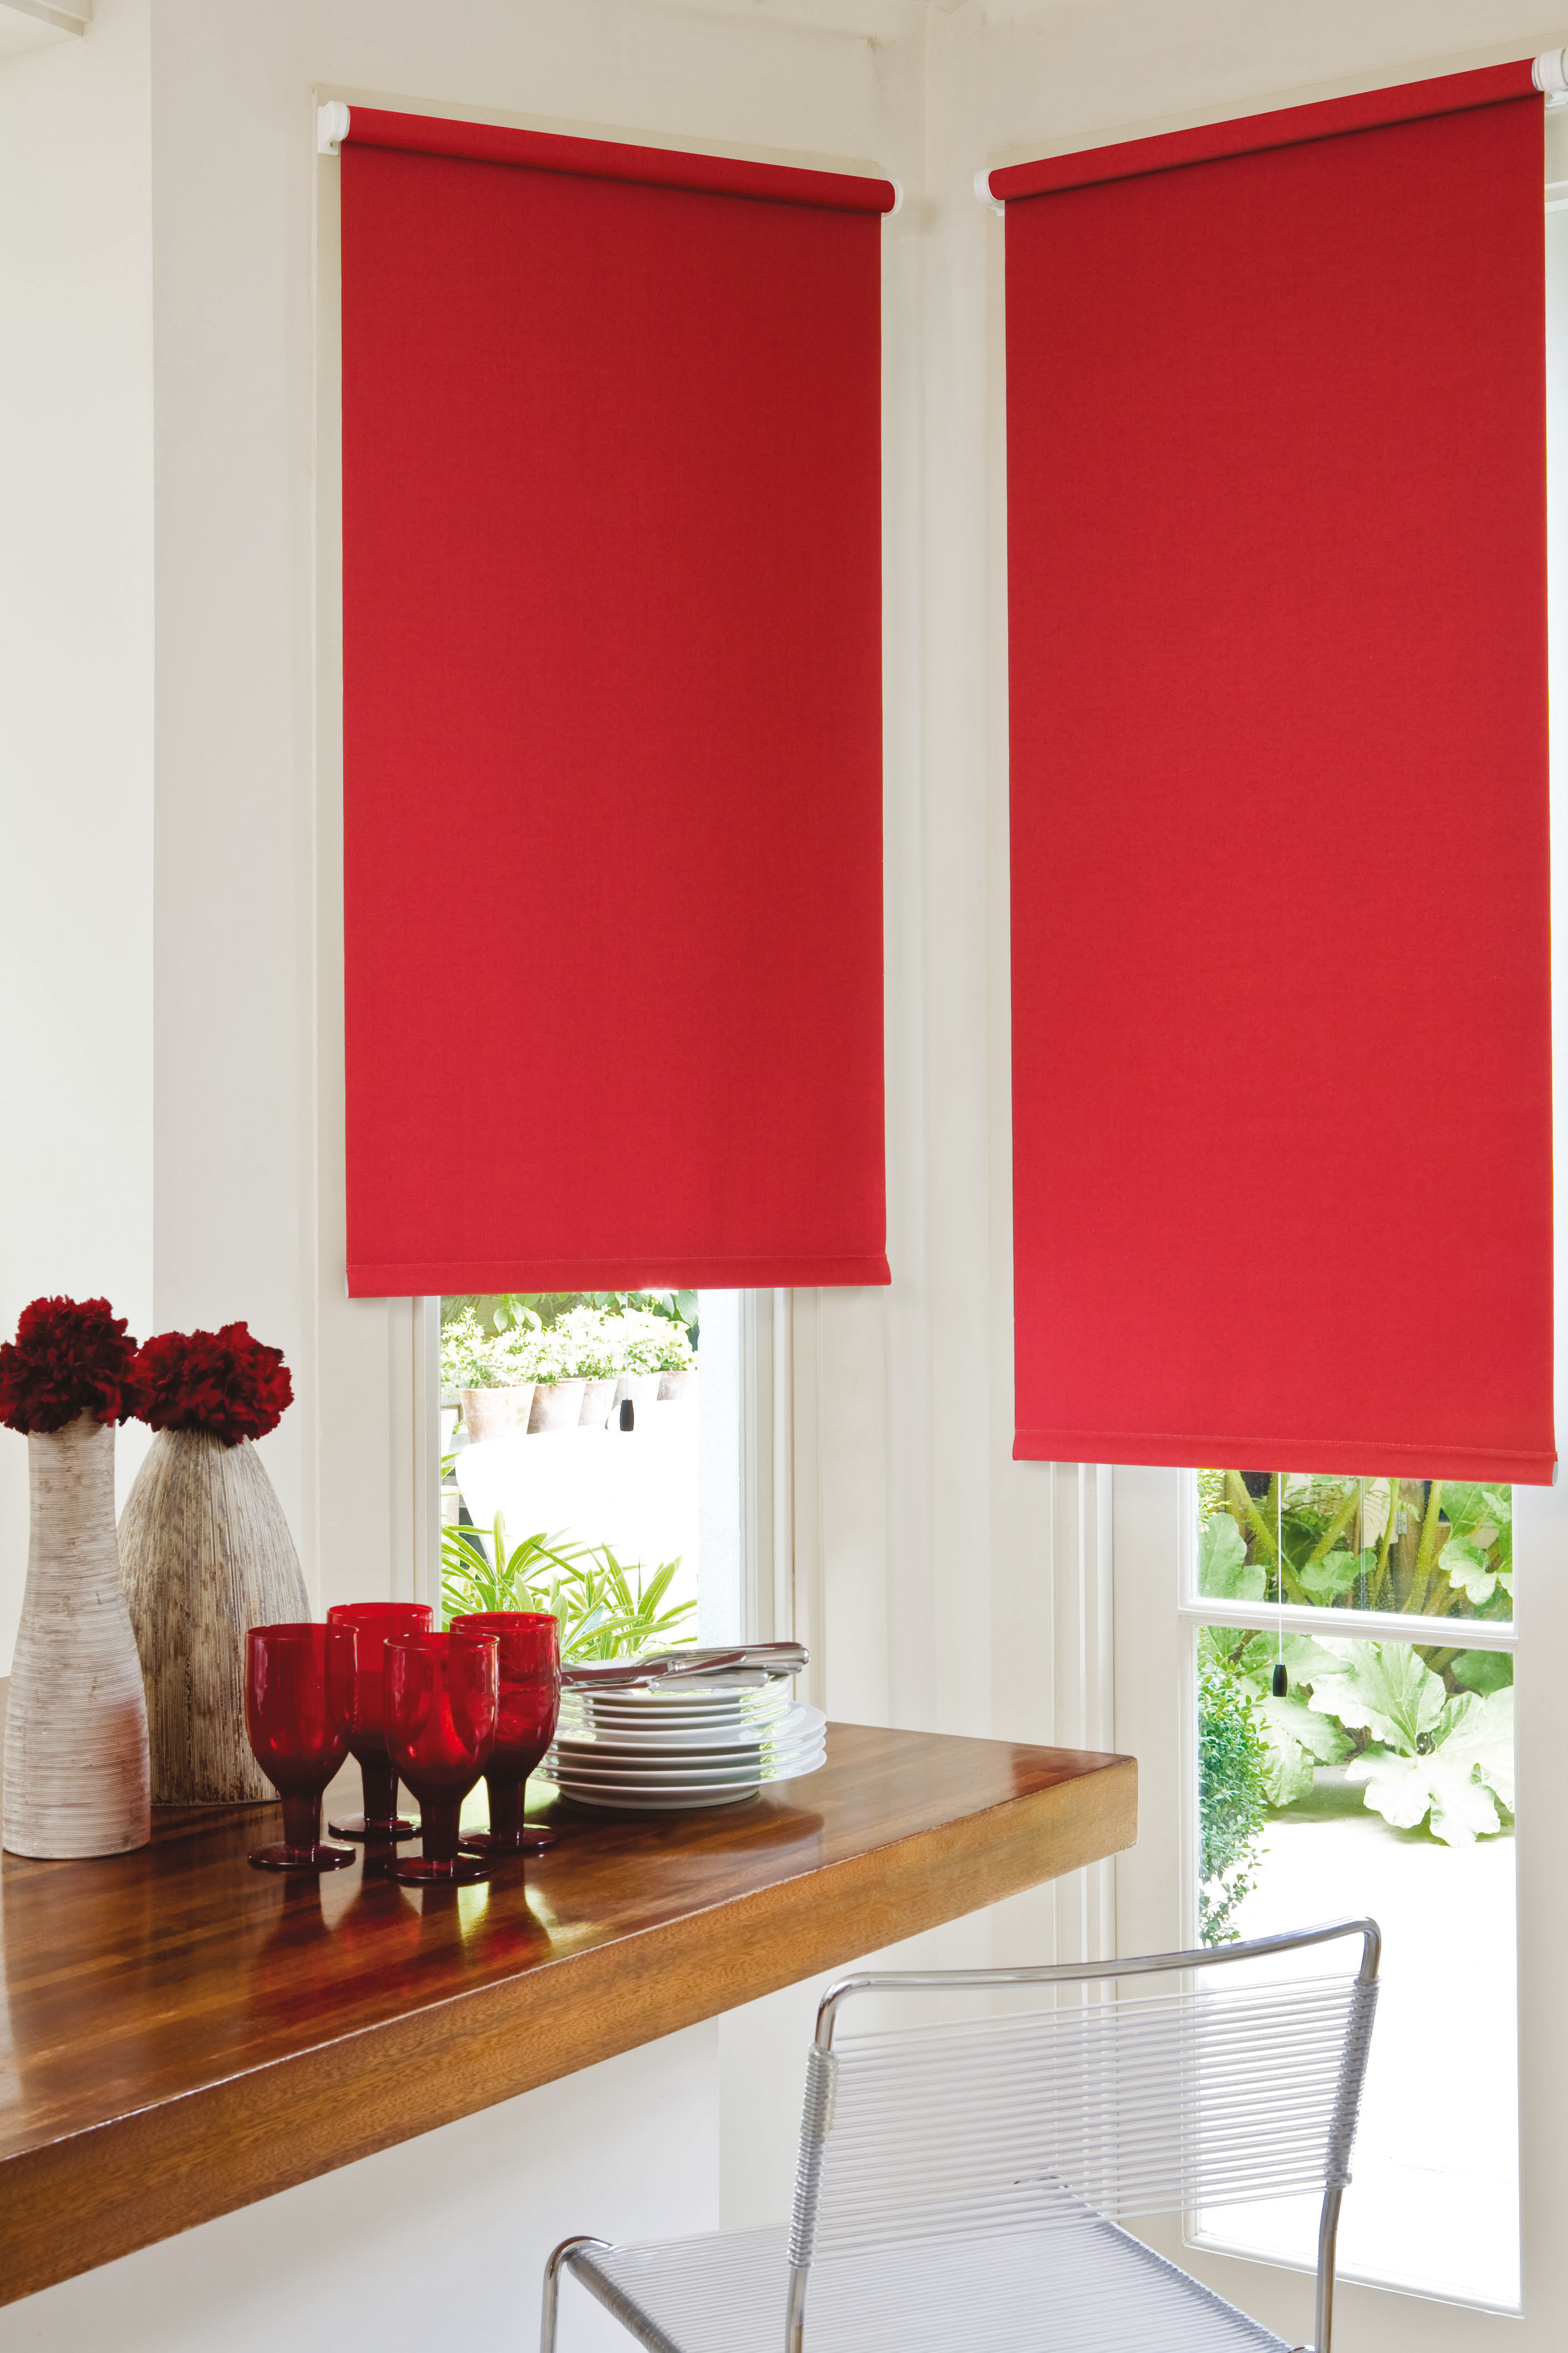 How to choose roller blinds: fabric, color, features